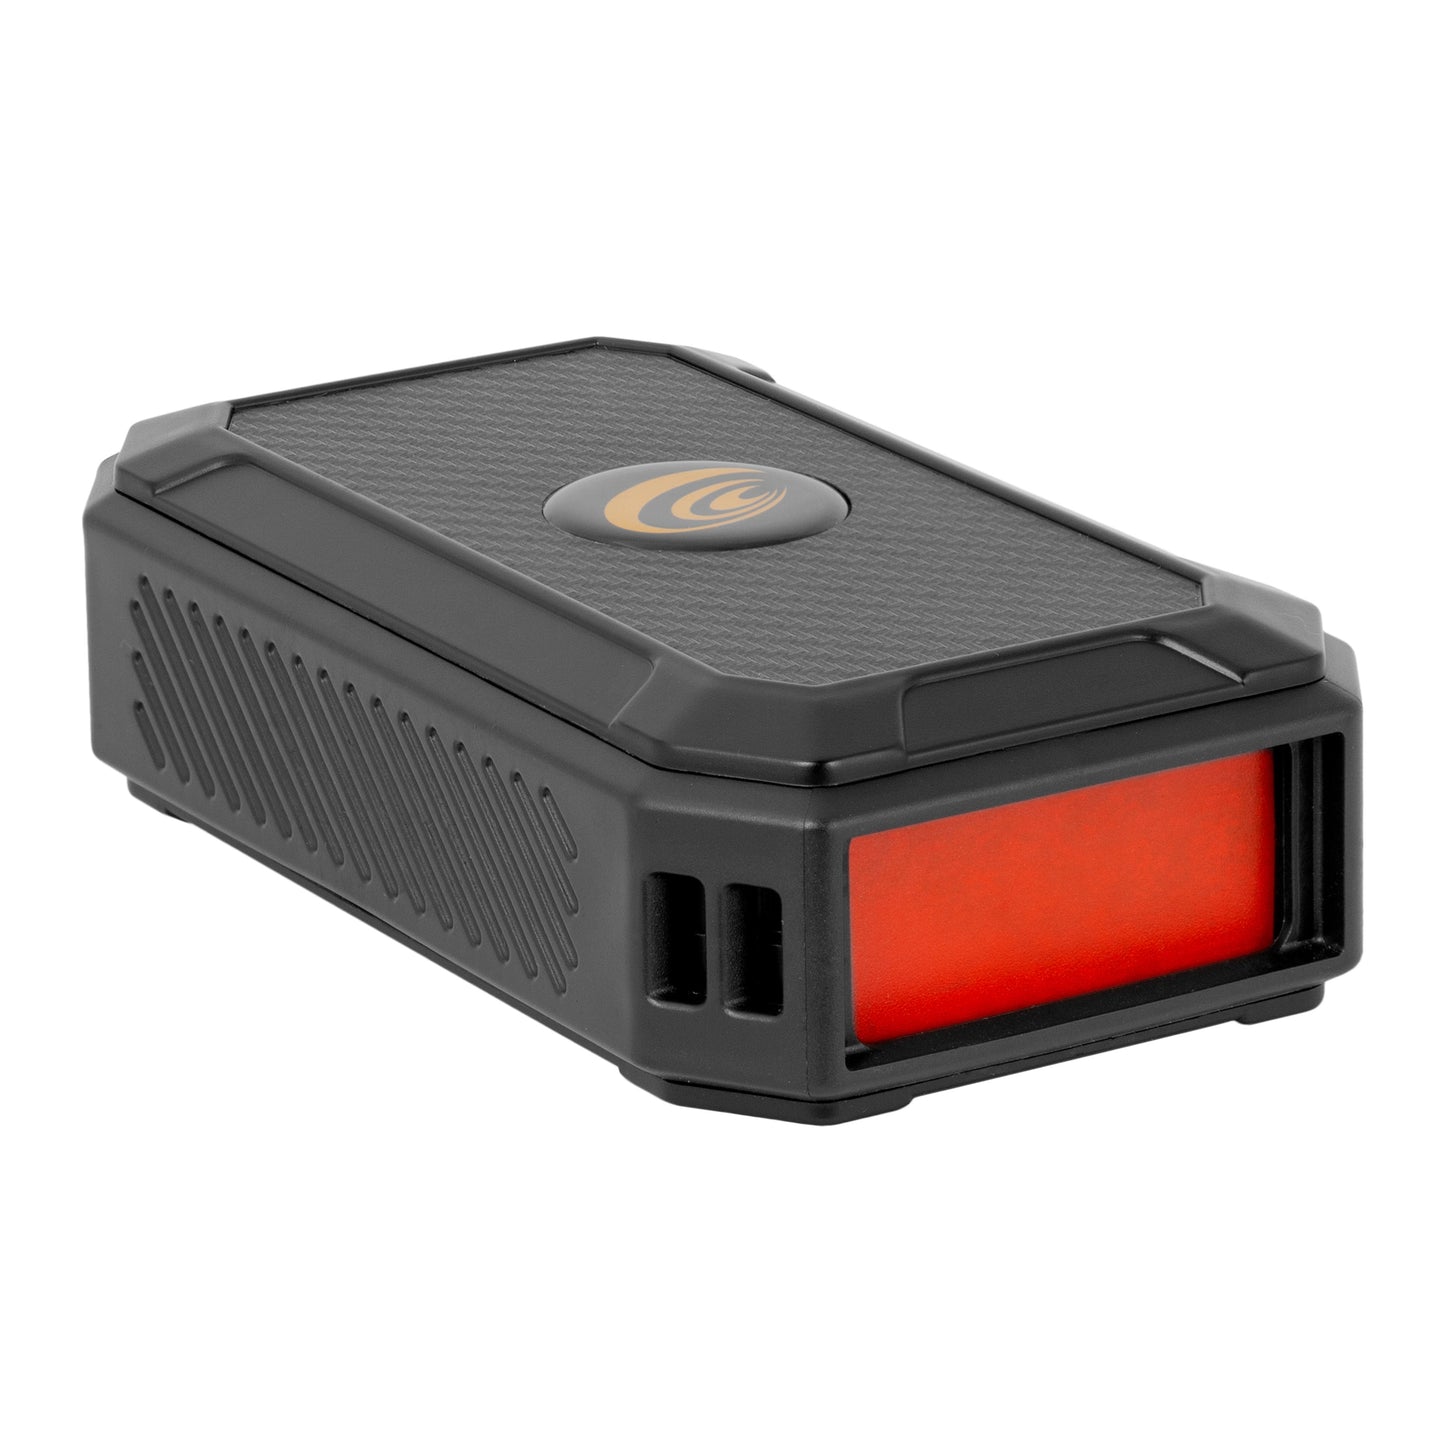 Explore Scientific USB Power Bank with Red LED Flashlight - ES-PBFL-01